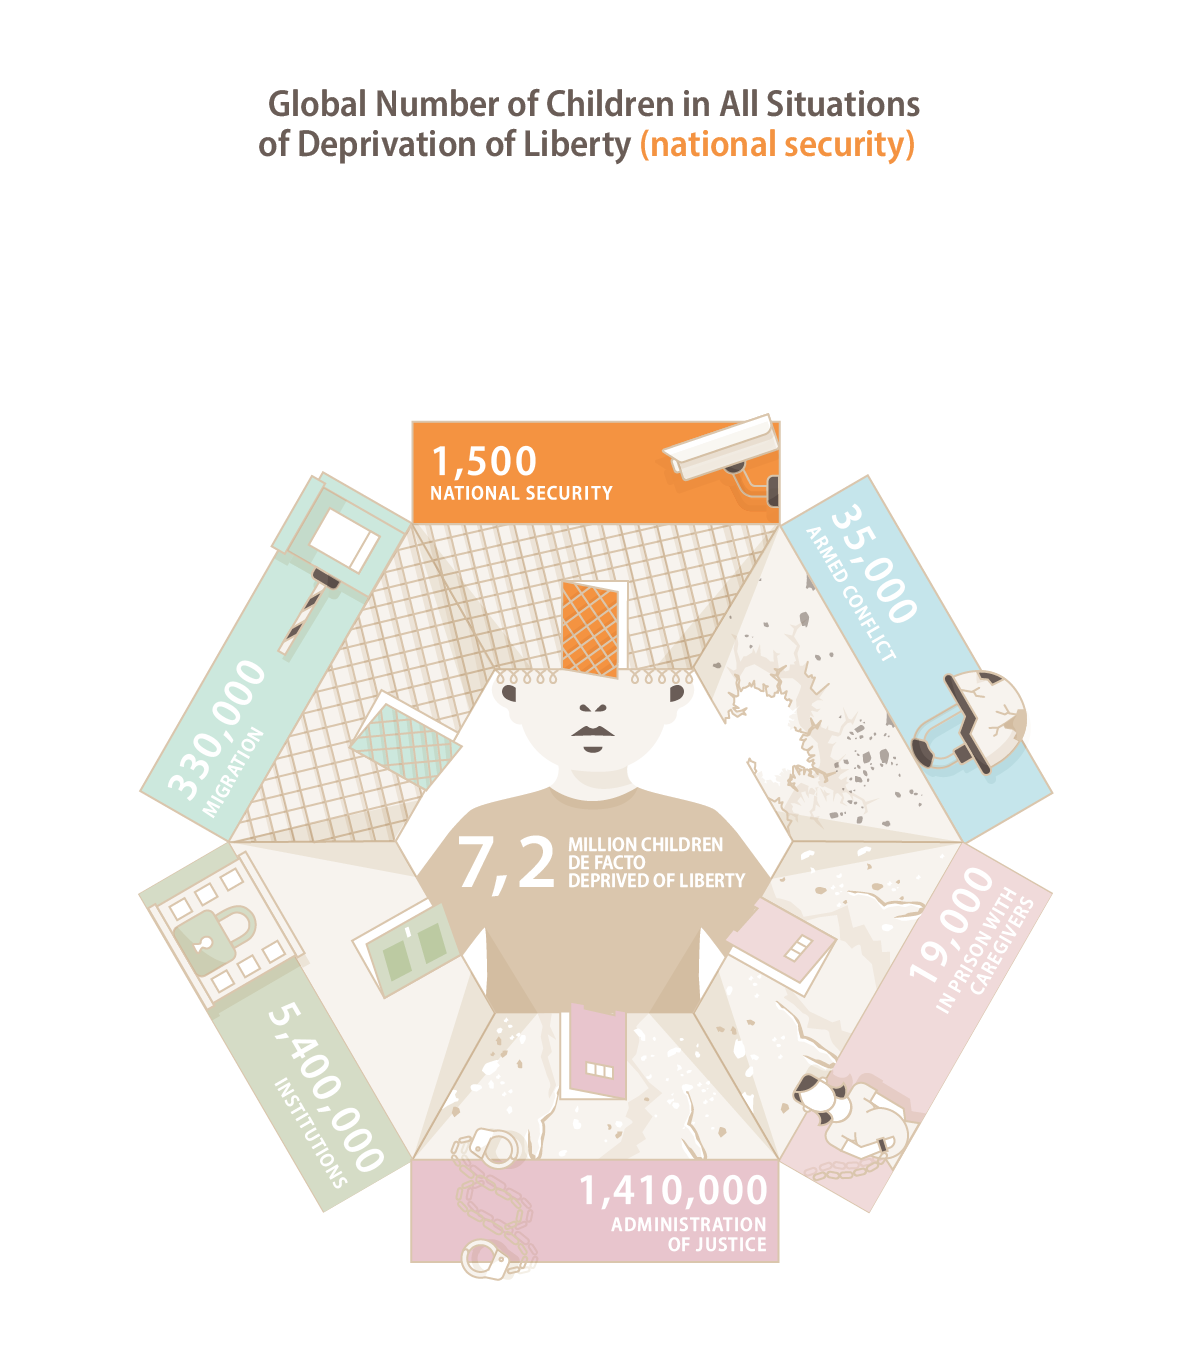 Global Number of Children in All Situations of Deprivation of Liberty (national security)